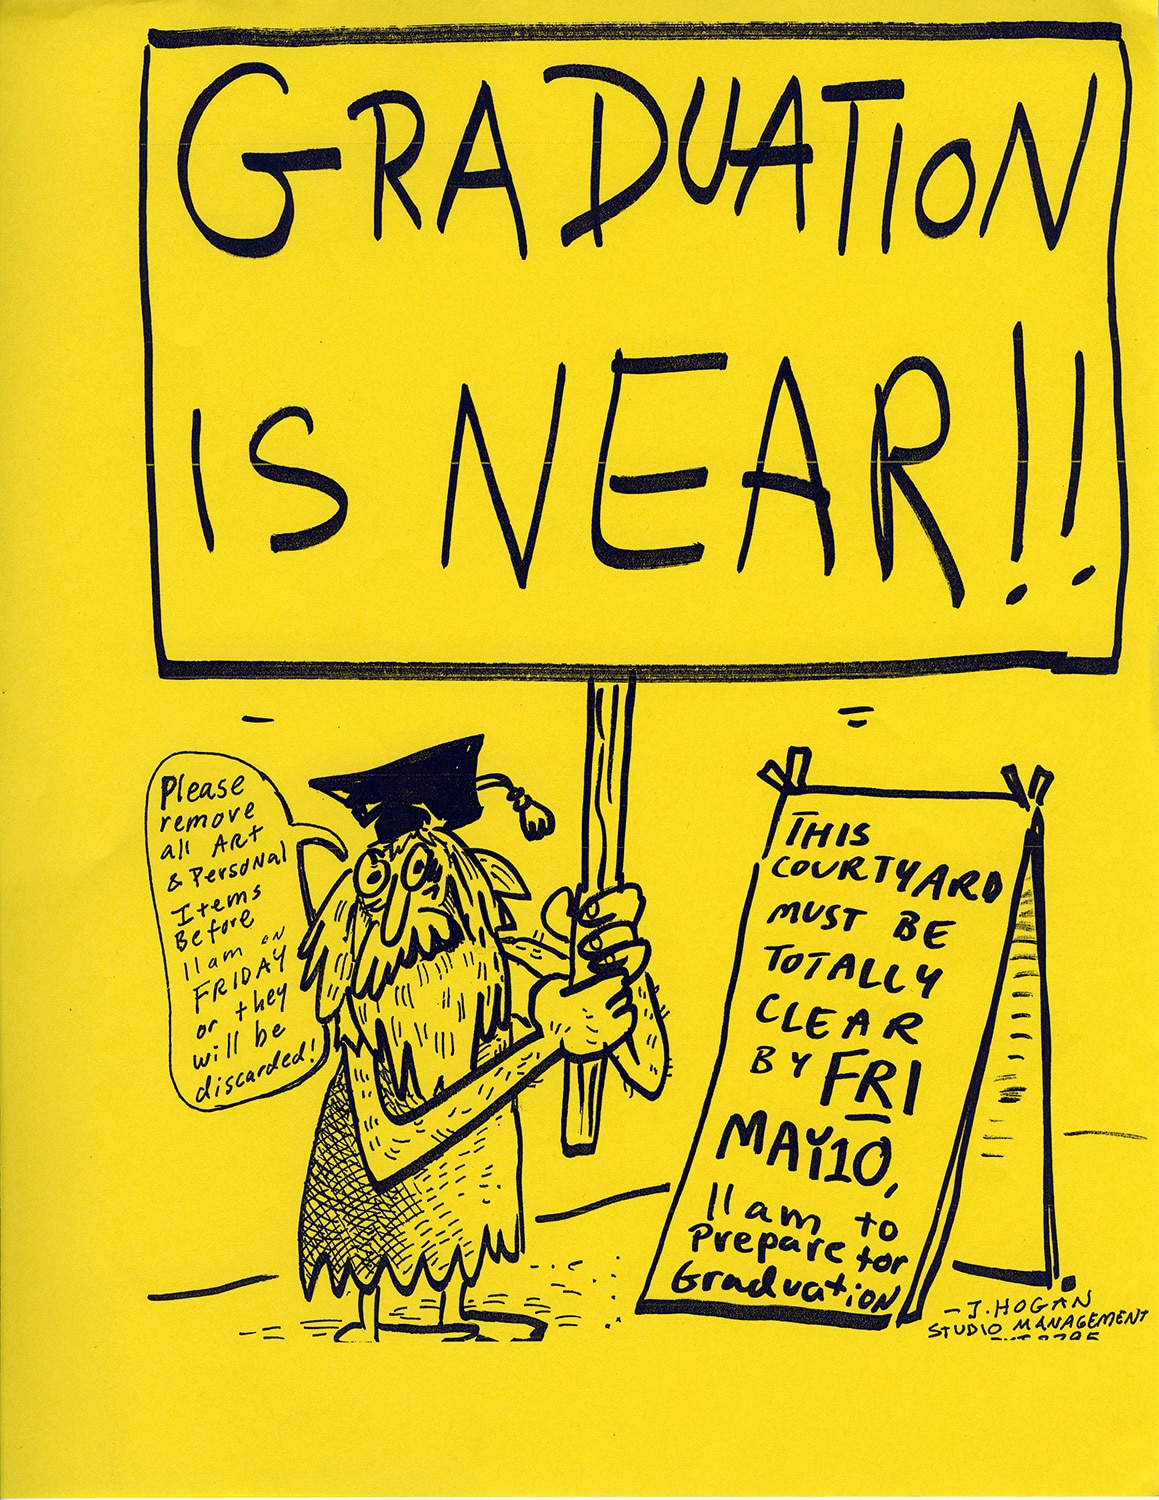 Sketch of person wearing a graduation cap holding a large sign reading 'Graduation is near!!'